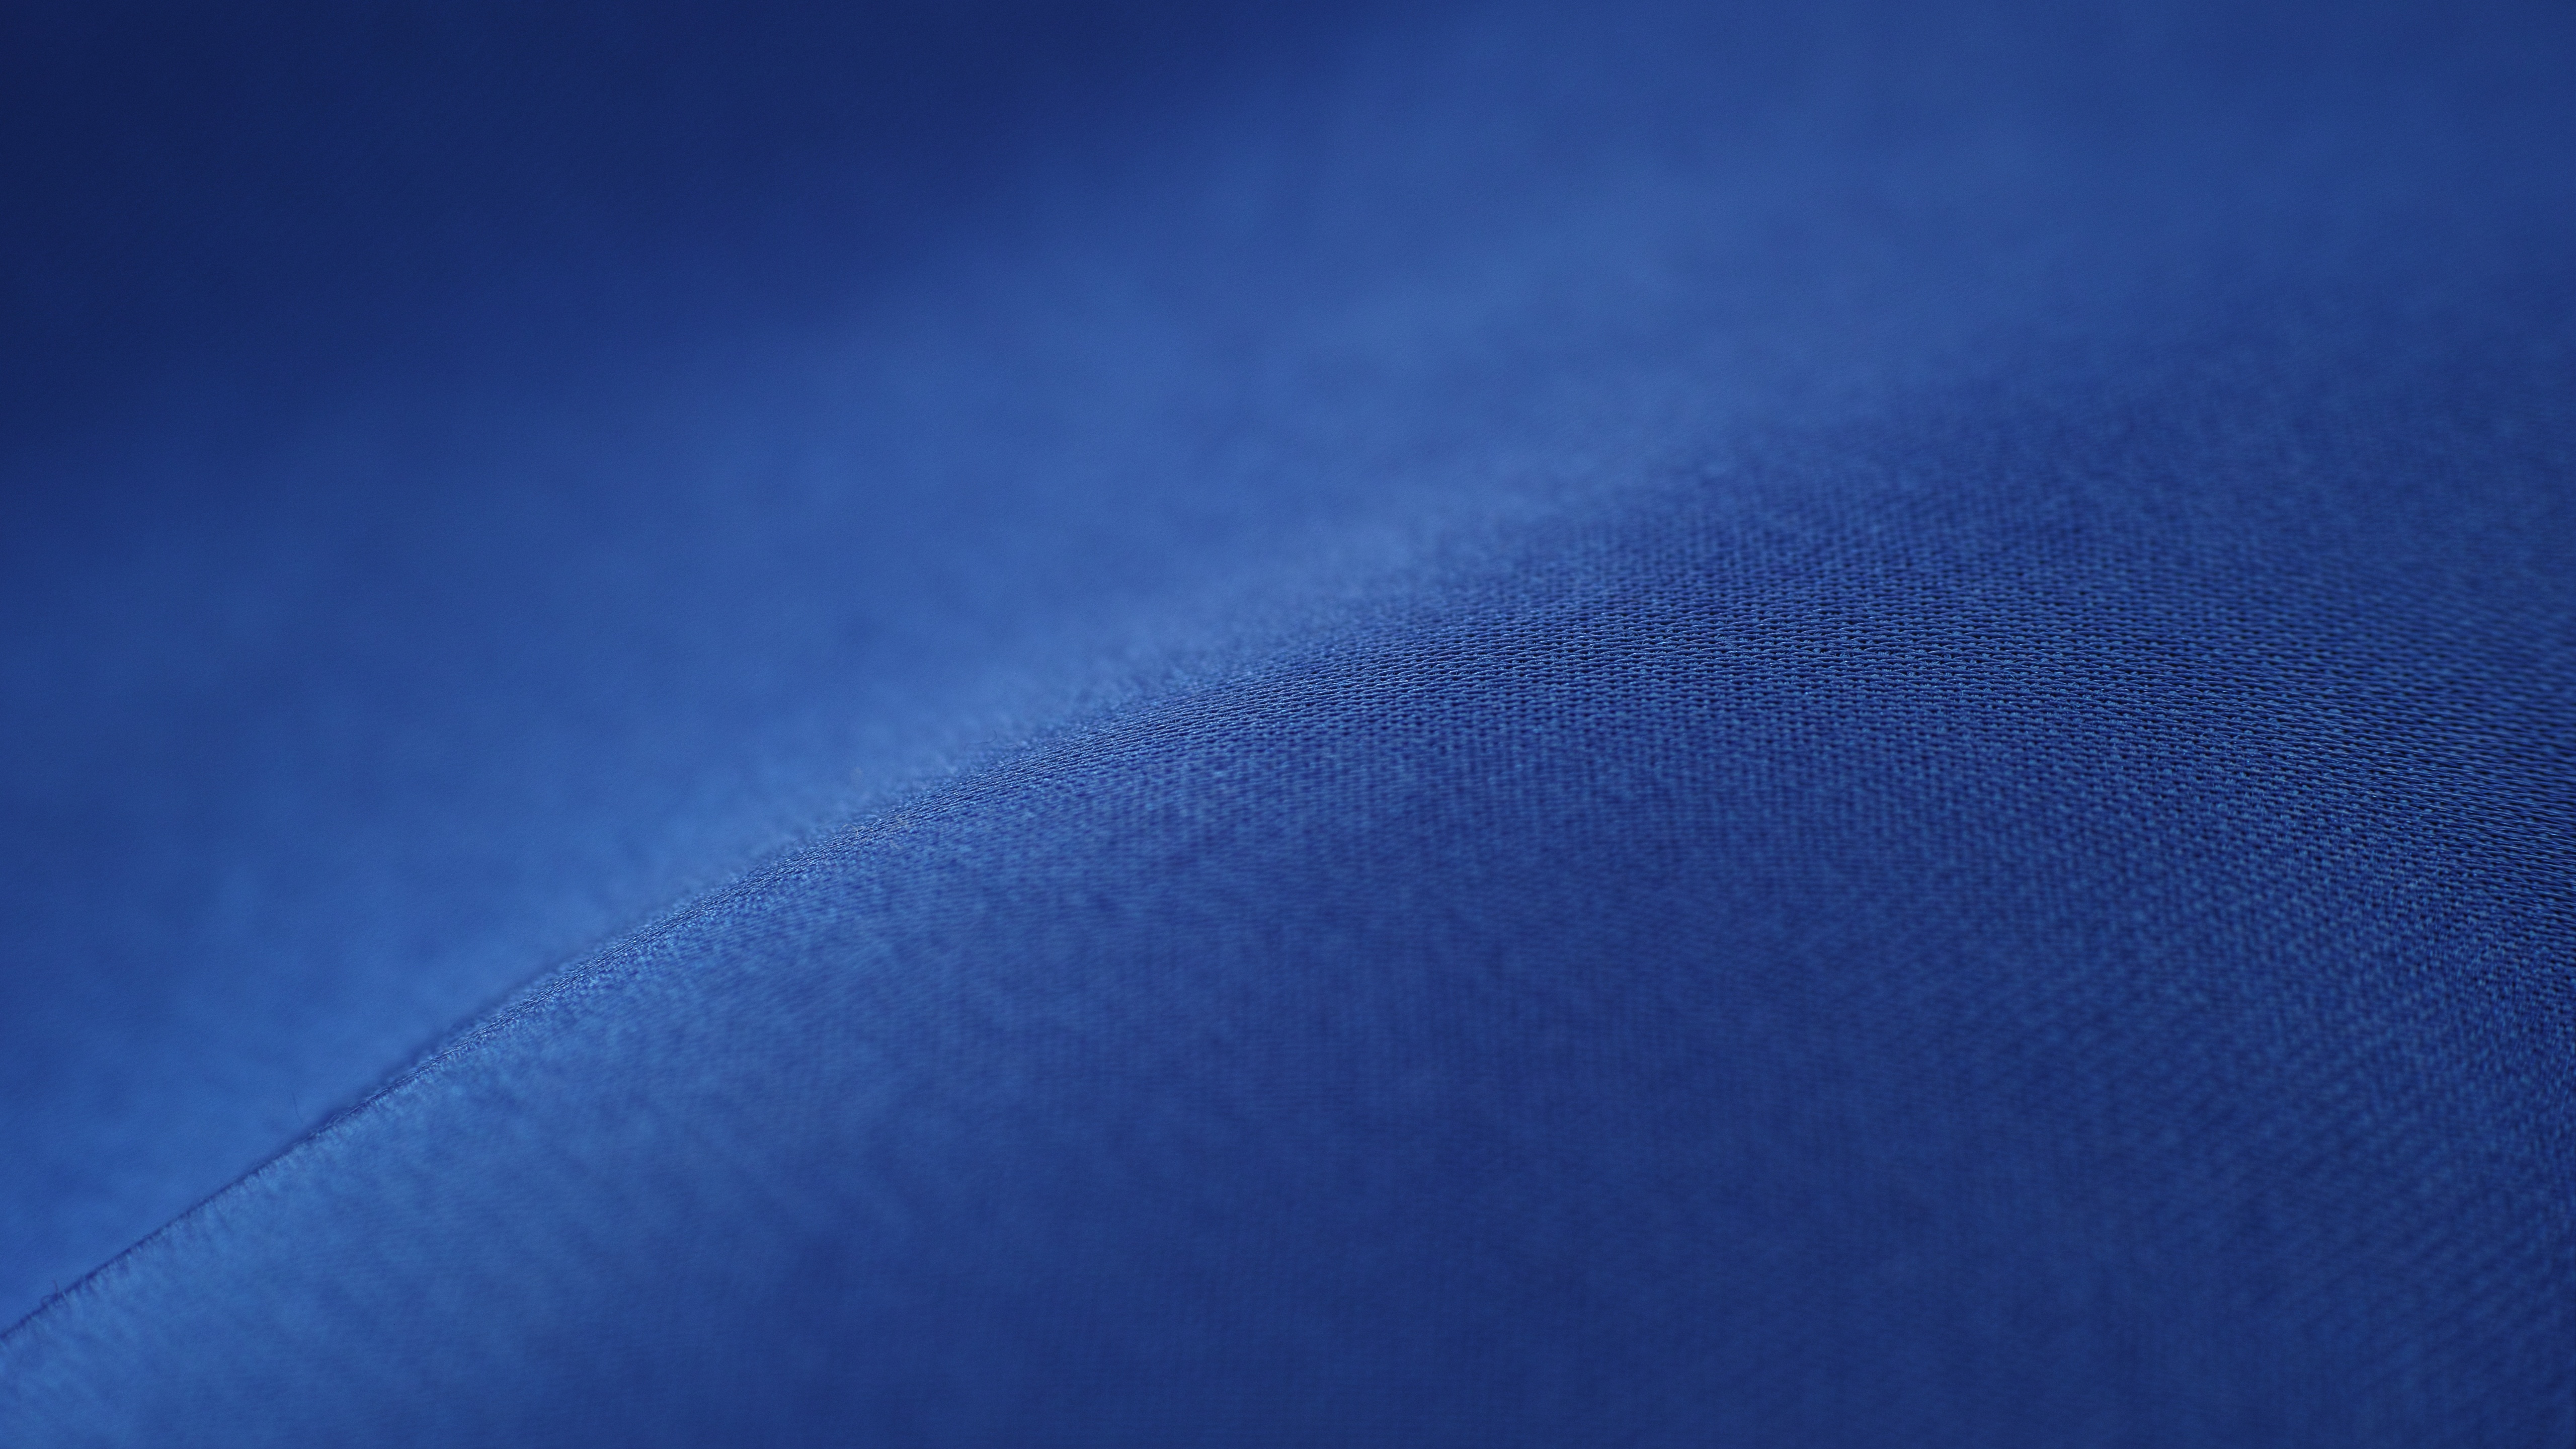 Fabric Wallpaper 4K, Cloth, Blue background, Photography, #7052